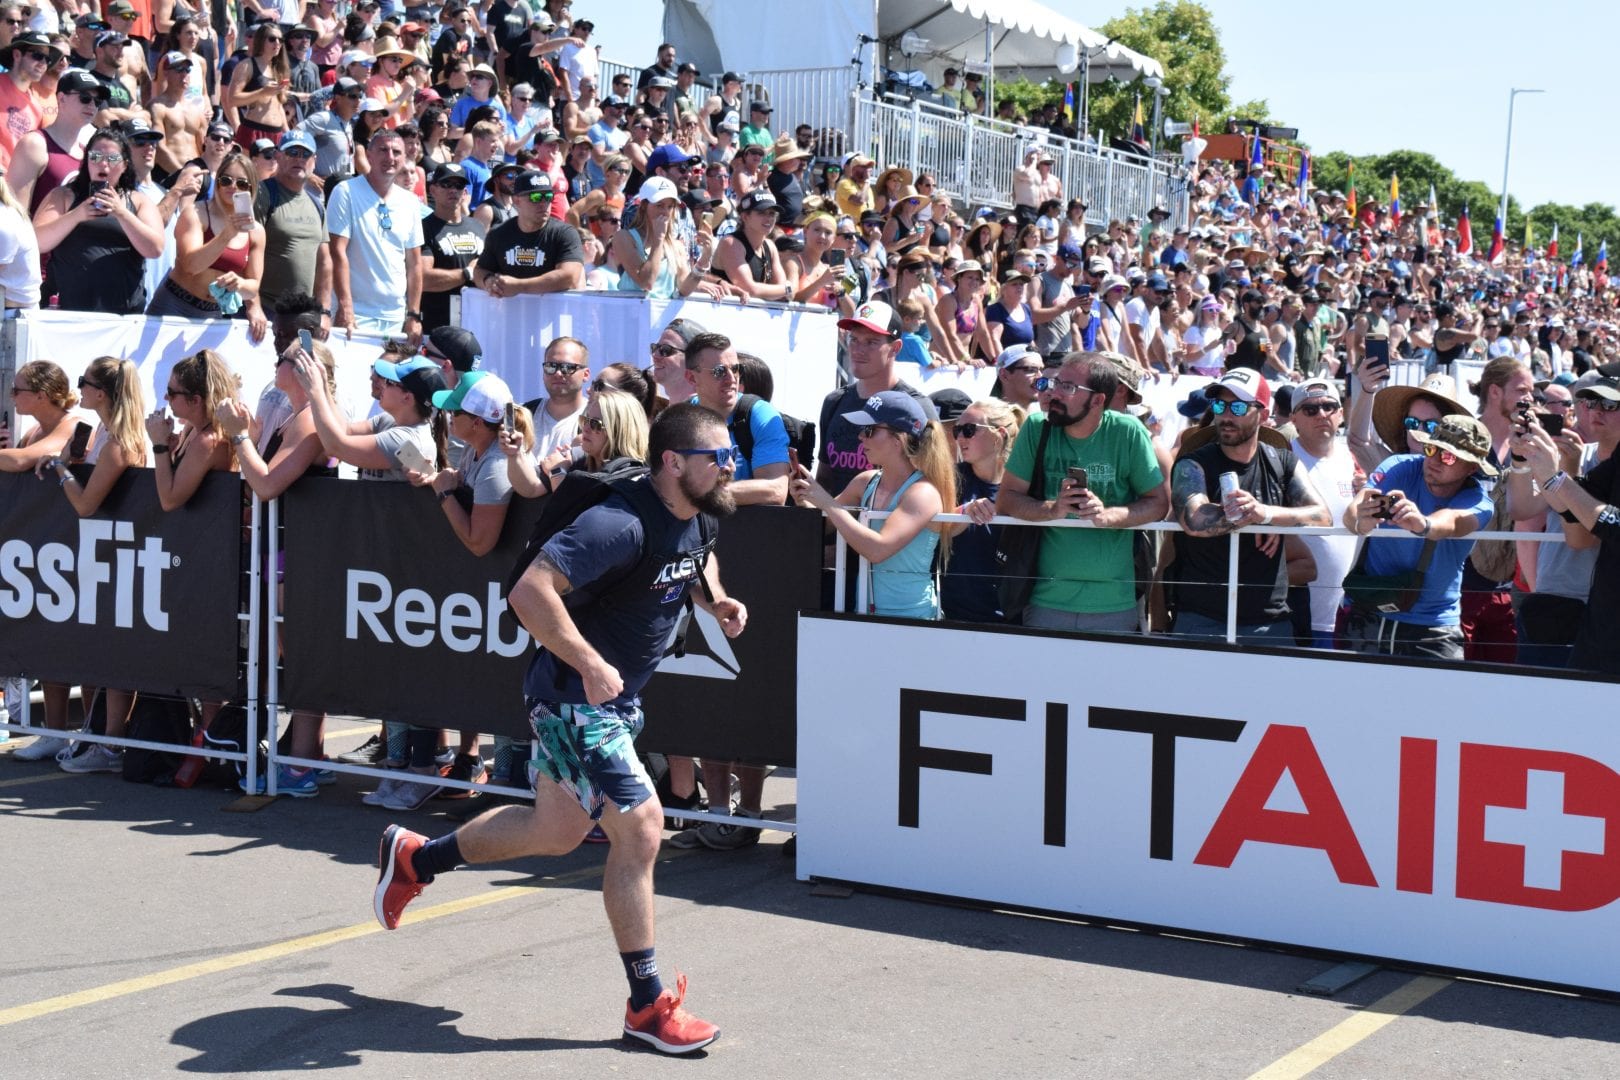 Matt Mcleod of Australia completes the Ruck Run event at the 2019 CrossFit Games